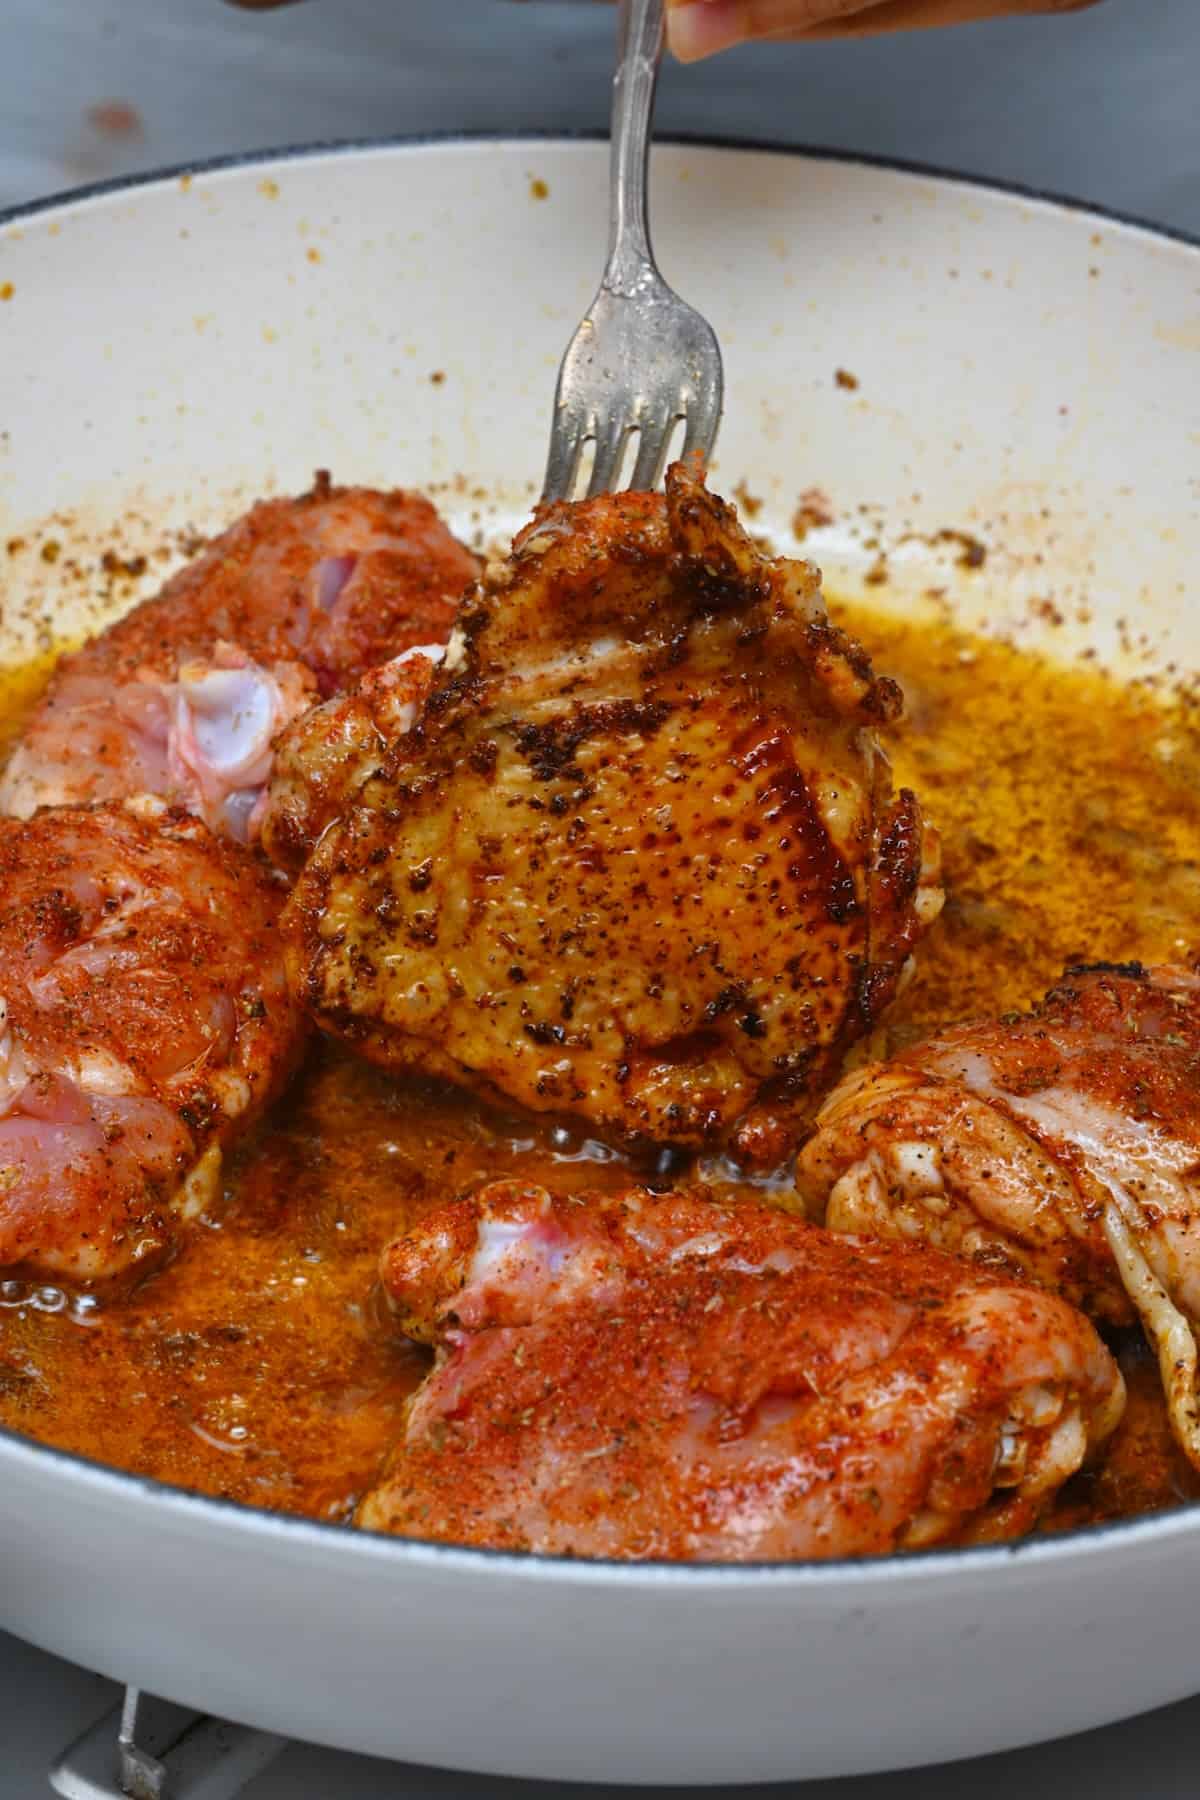 Crisped chicken thighs in a pan